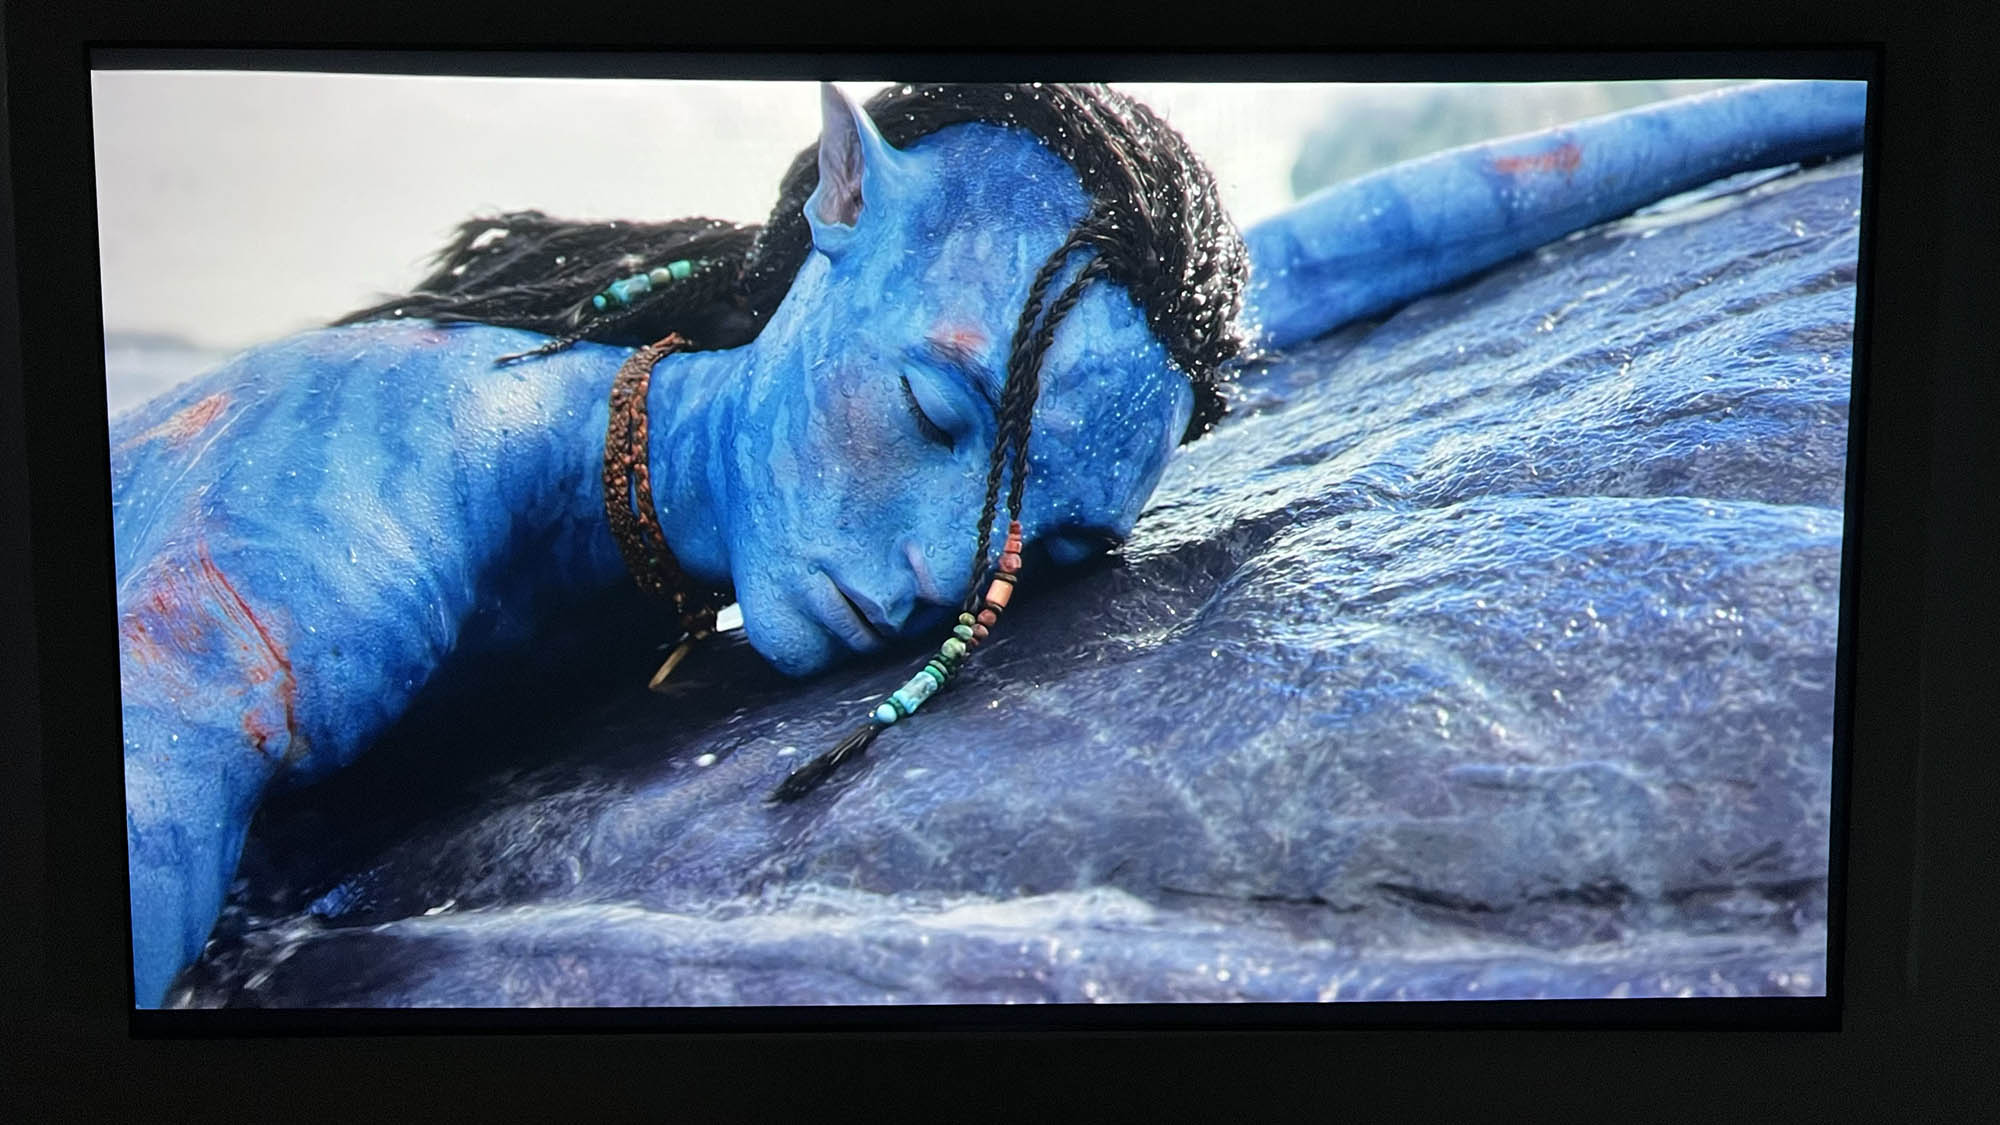 Avatar: The Way of Water playing in Digital 4K/HDR/Atmos on a Sony Bravia 4k TV with Dolby Vision